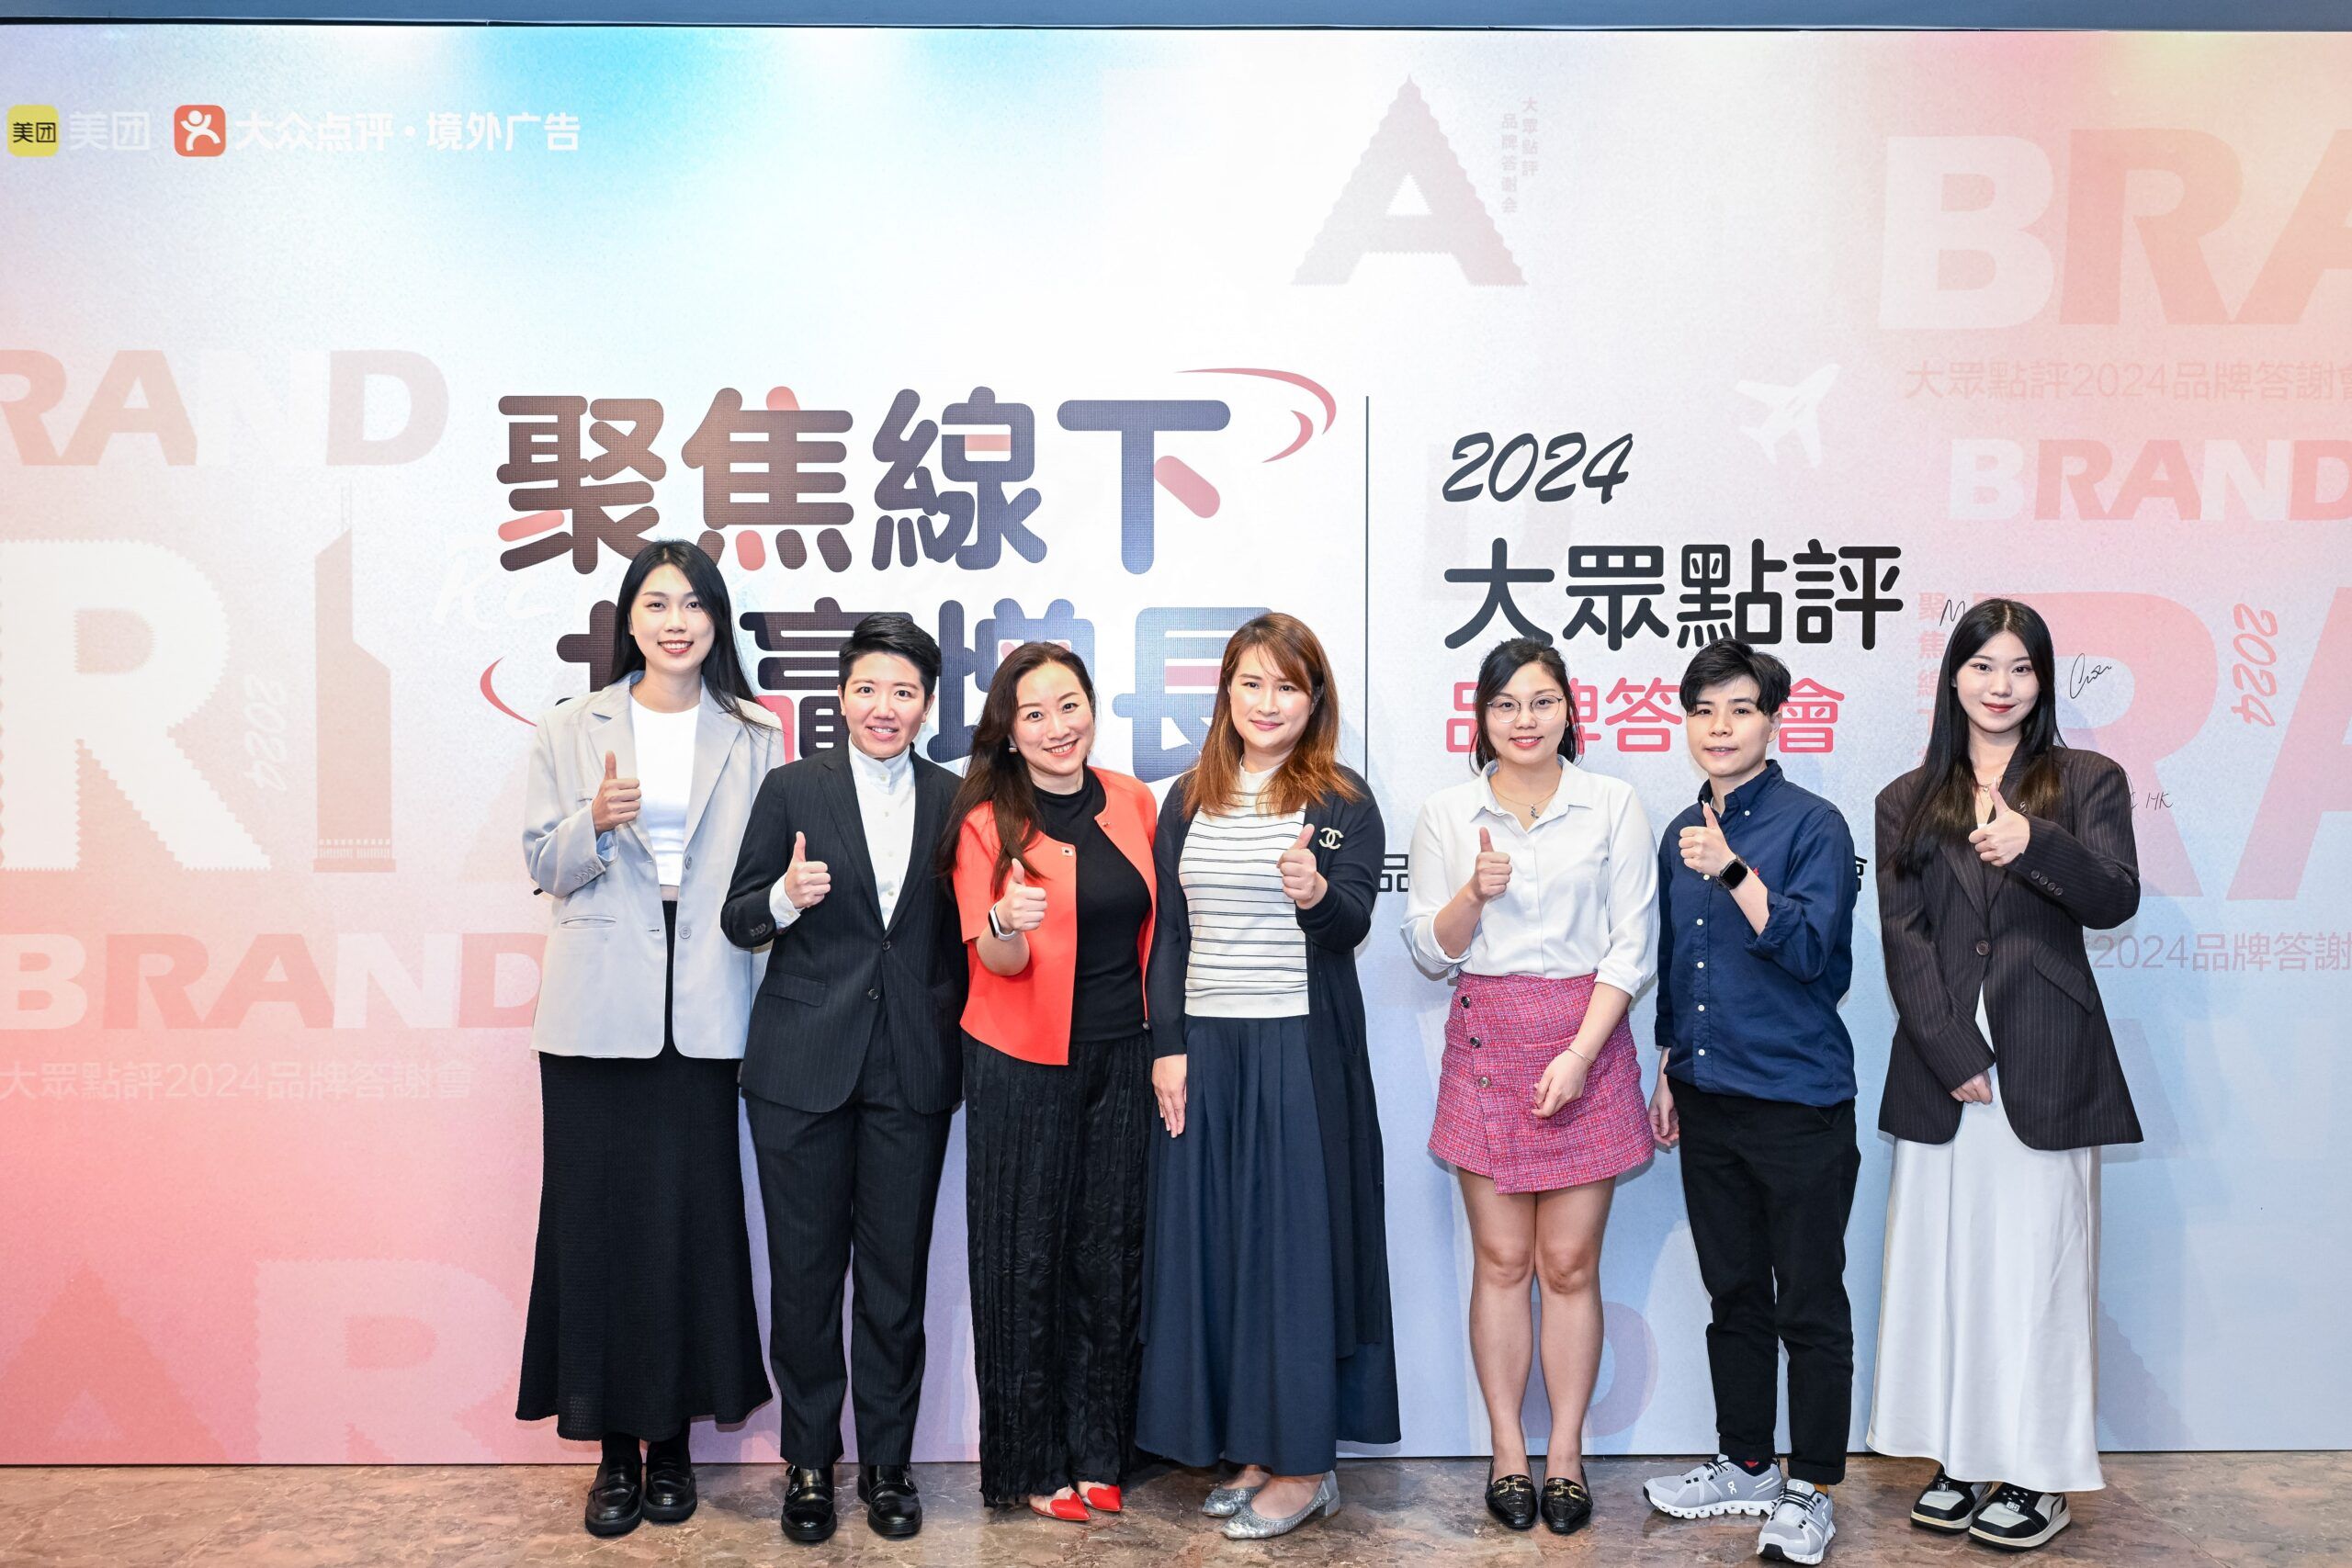 iClick Recognized as Excellent Agency at Meituan Dianping Client Event in 2024 (for KR Market)